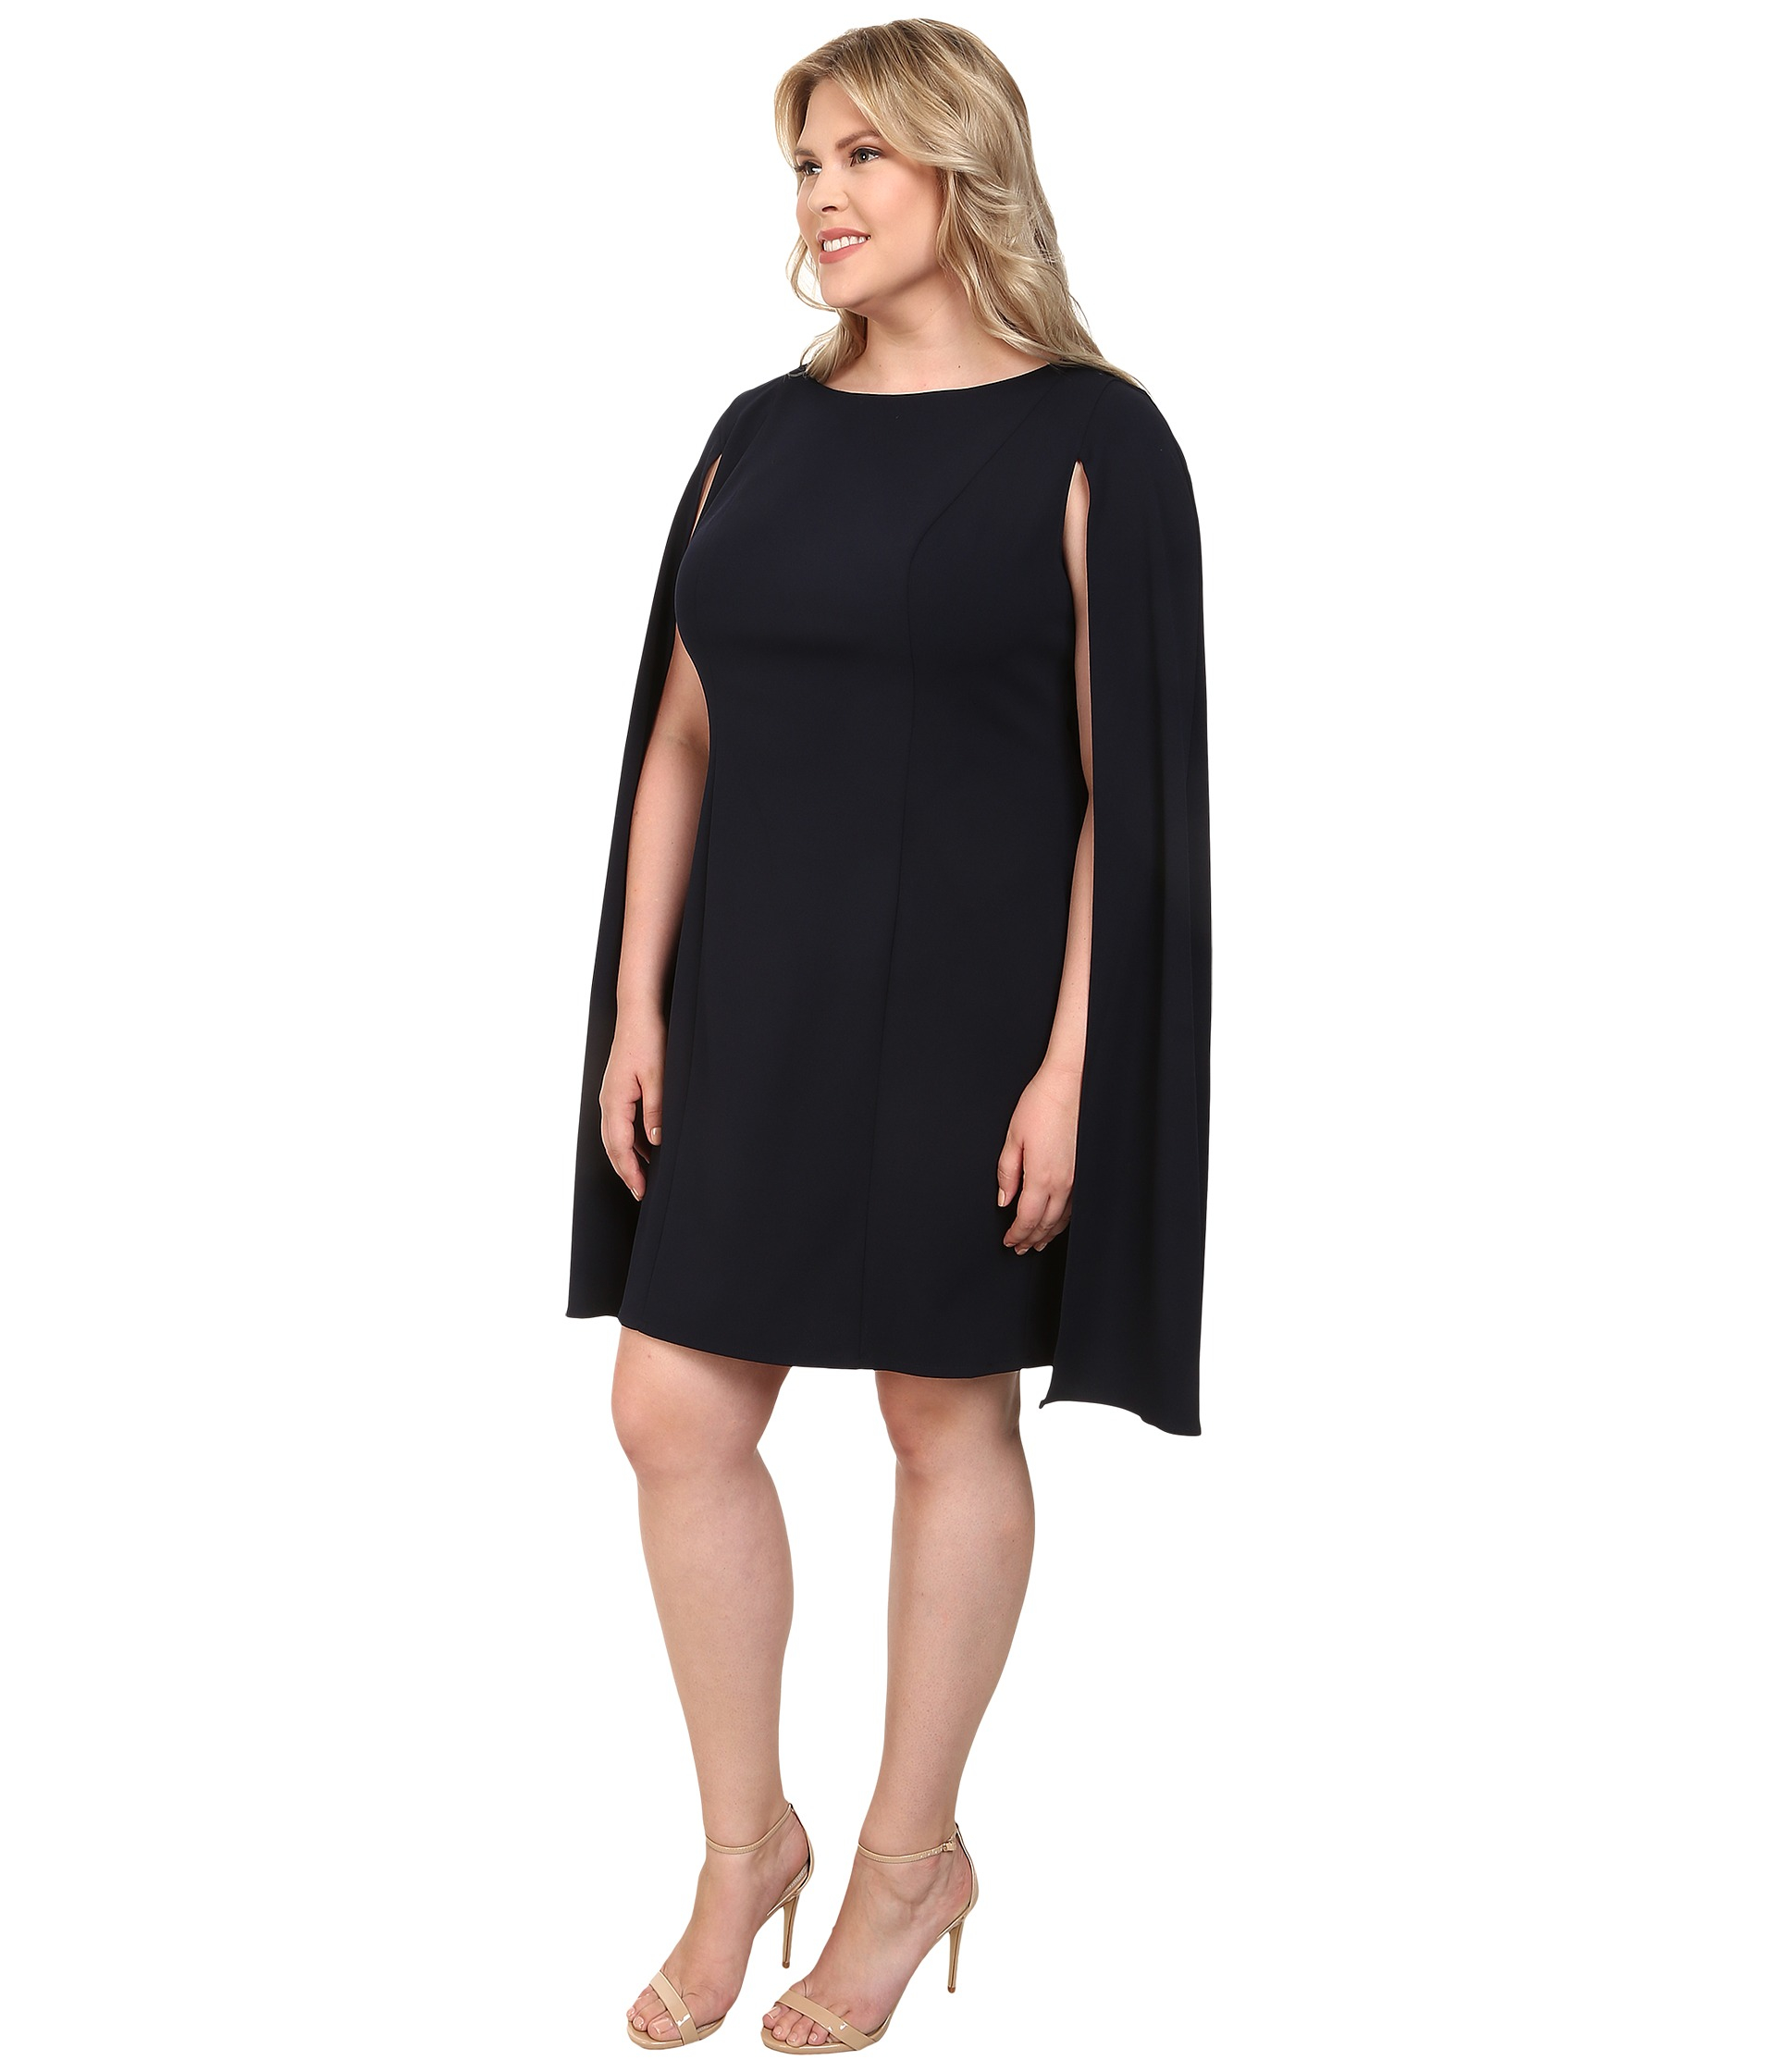 Lyst - Adrianna Papell Plus Size Structured Cape Sheath Dress in Blue